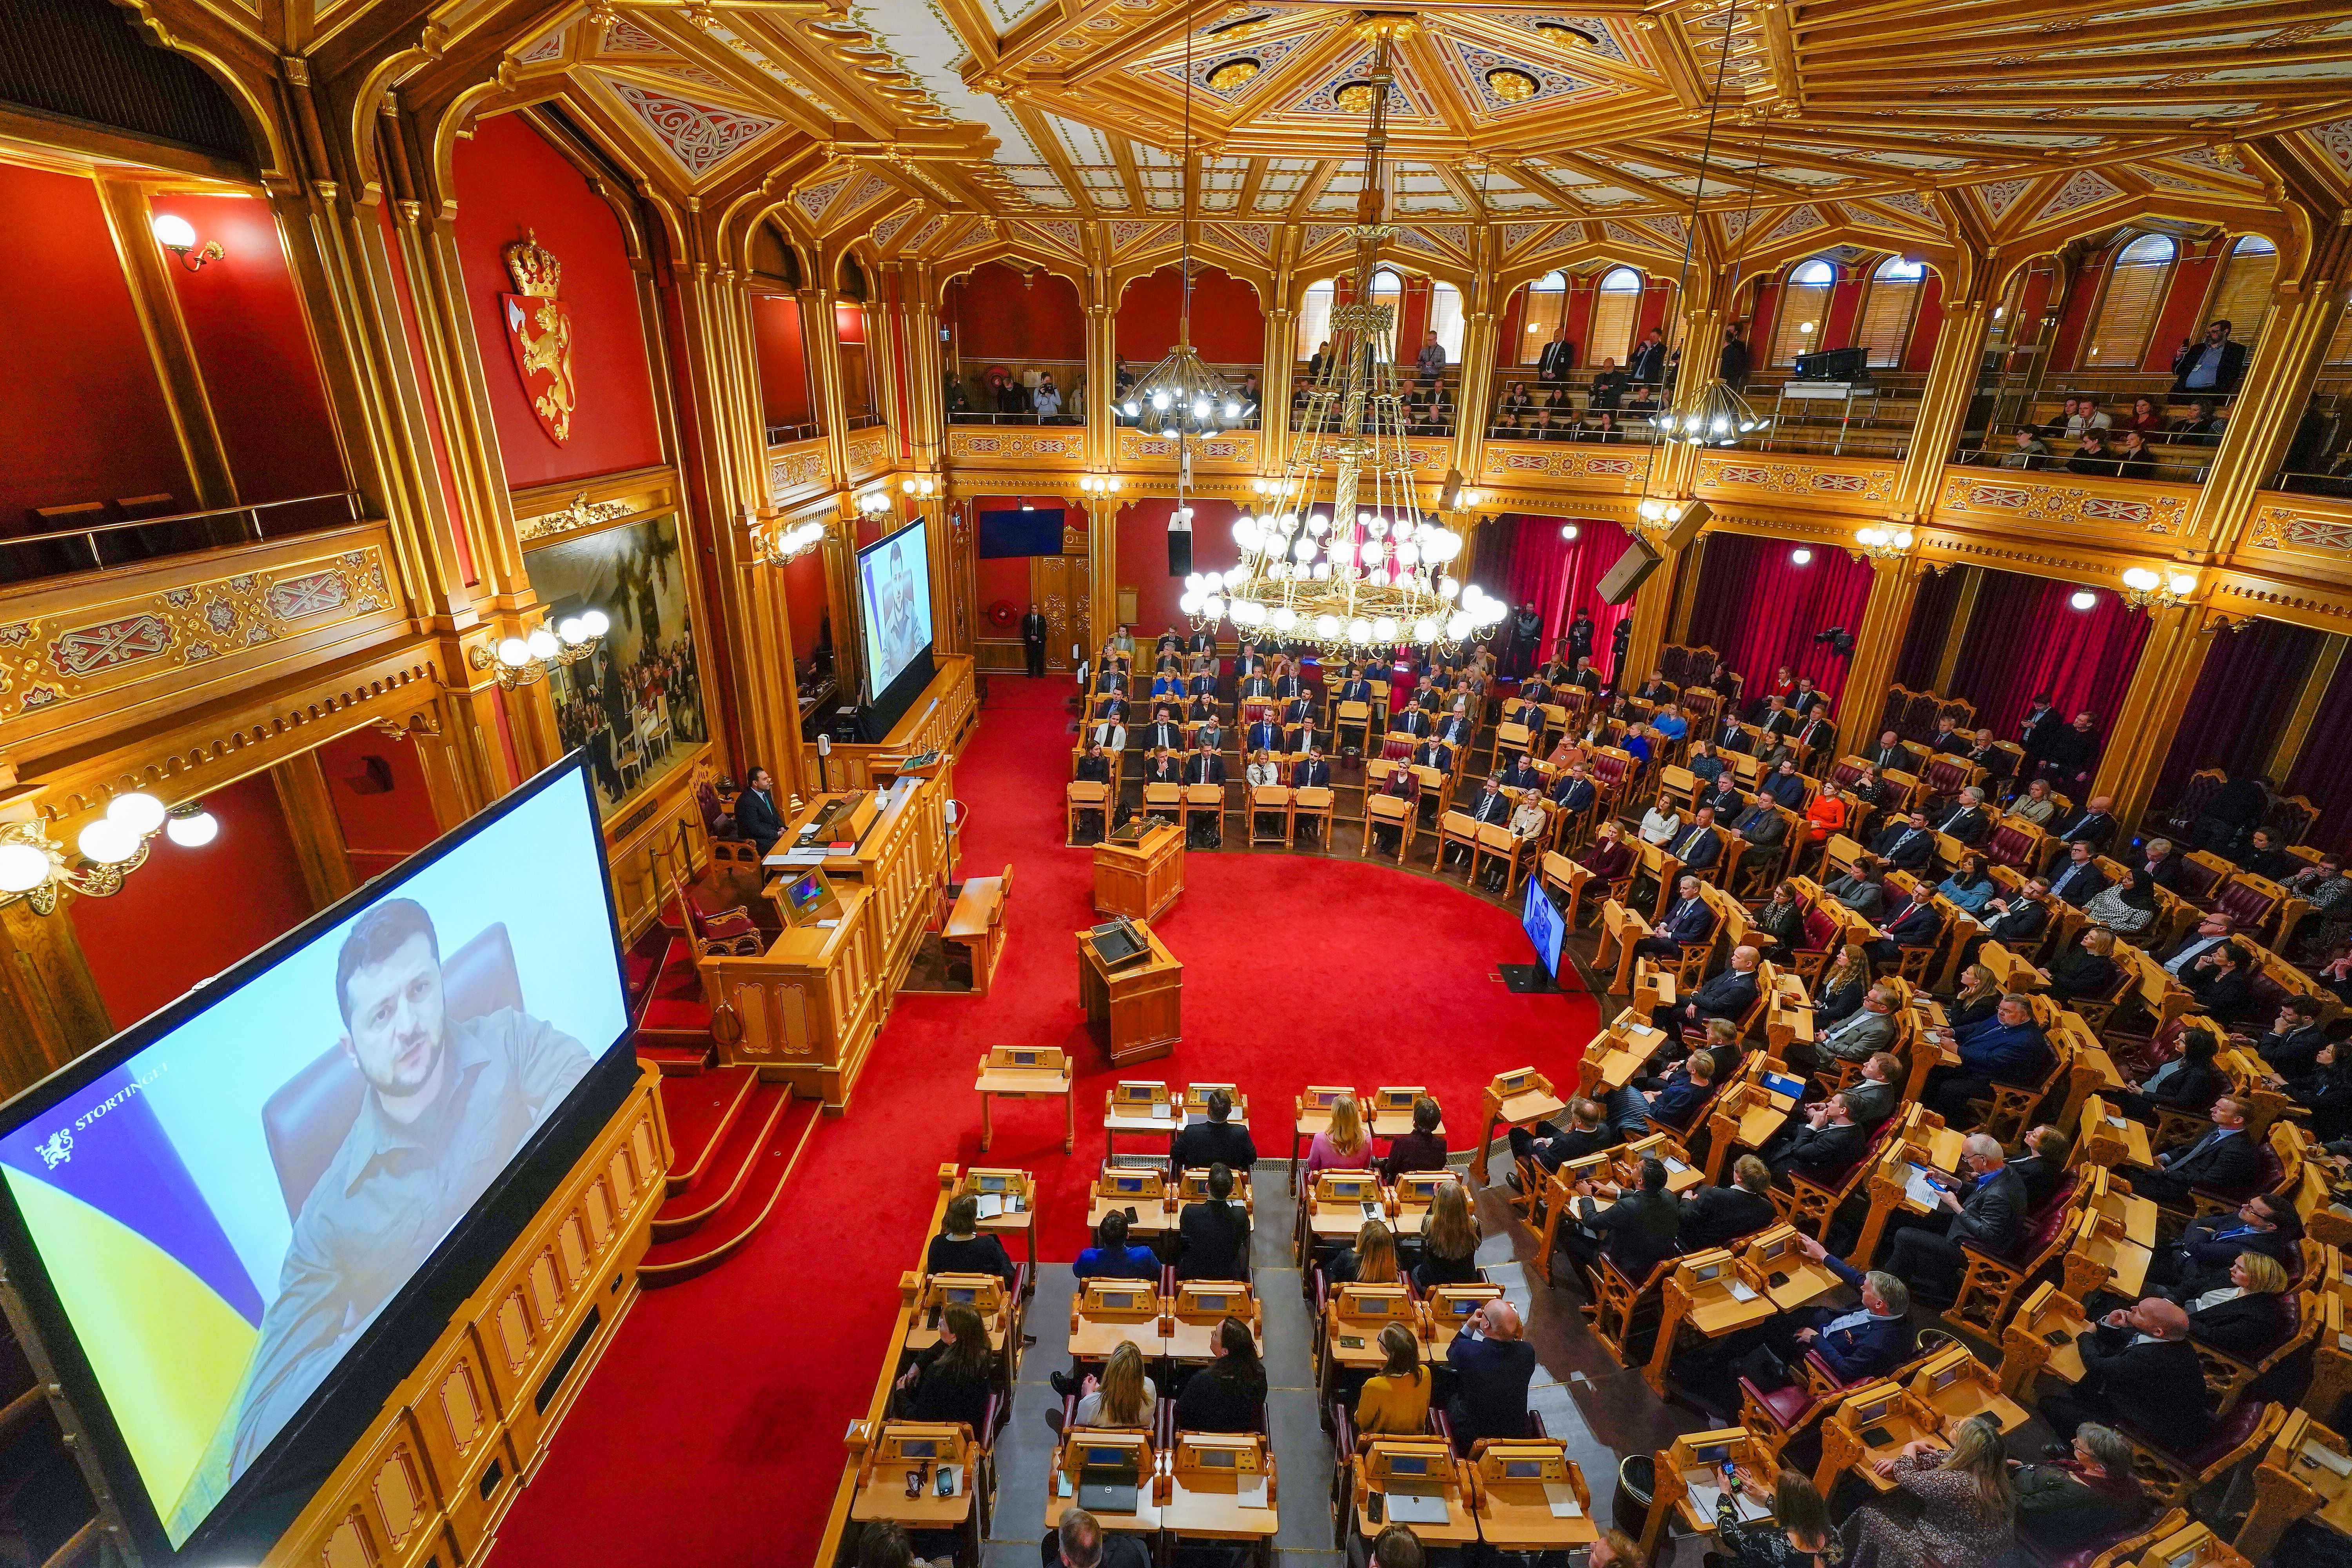 Ukrainian President Volodymyr Zelensky is seen on large screens as he addresses members of Norway's Parliament, The Storting, in Oslo, Norway, on March 30.